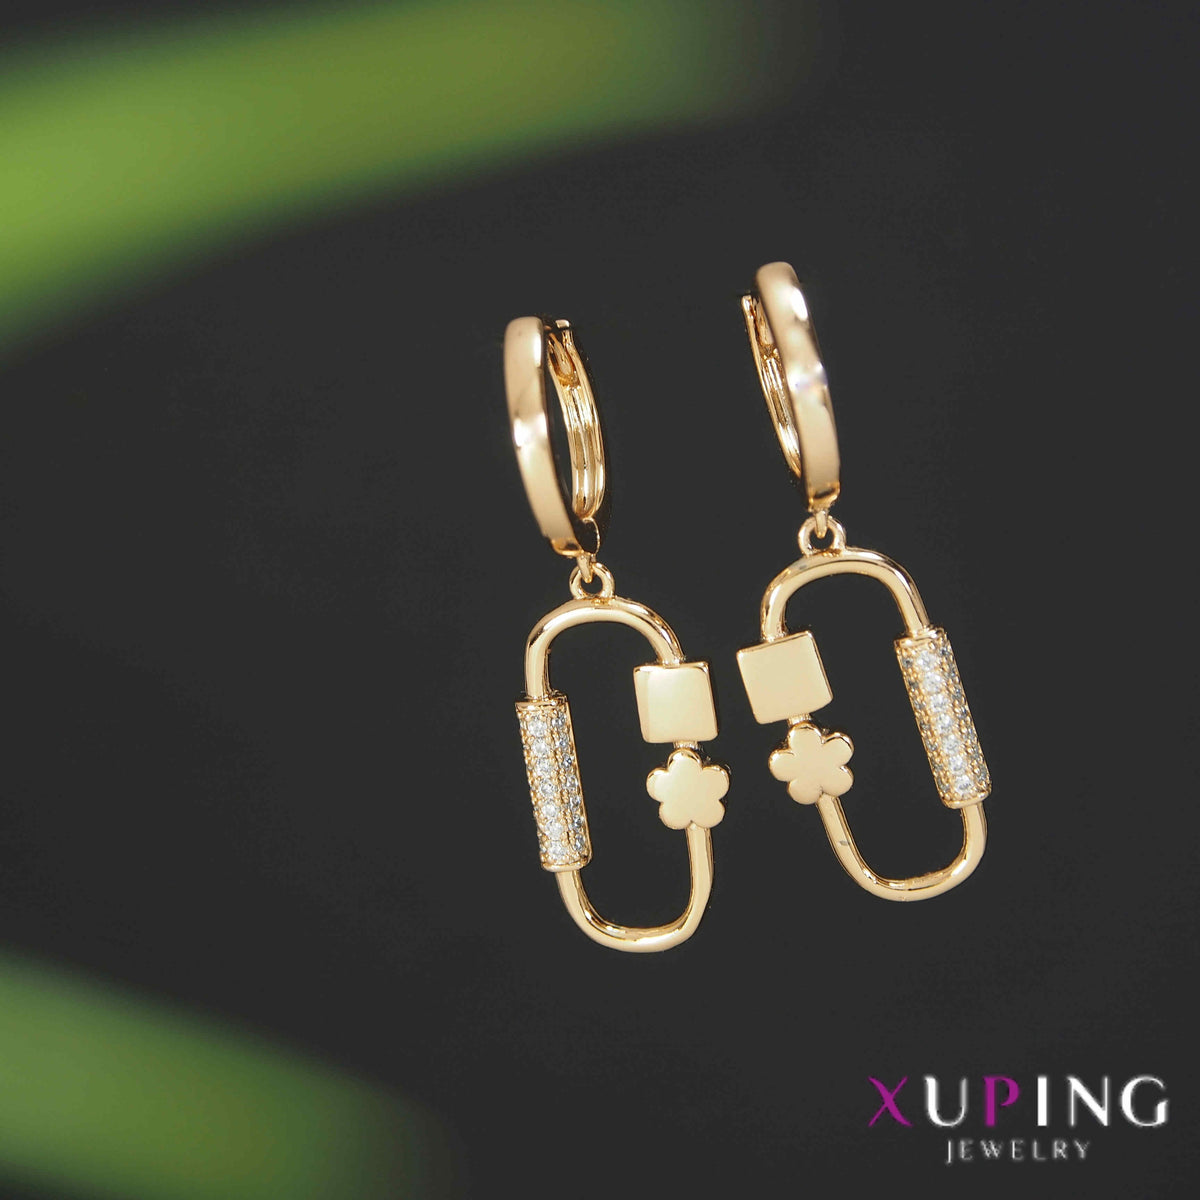 Gold Plated Geometric Floral Cubic Zicronia Xuping Earring- XPNGER 4601